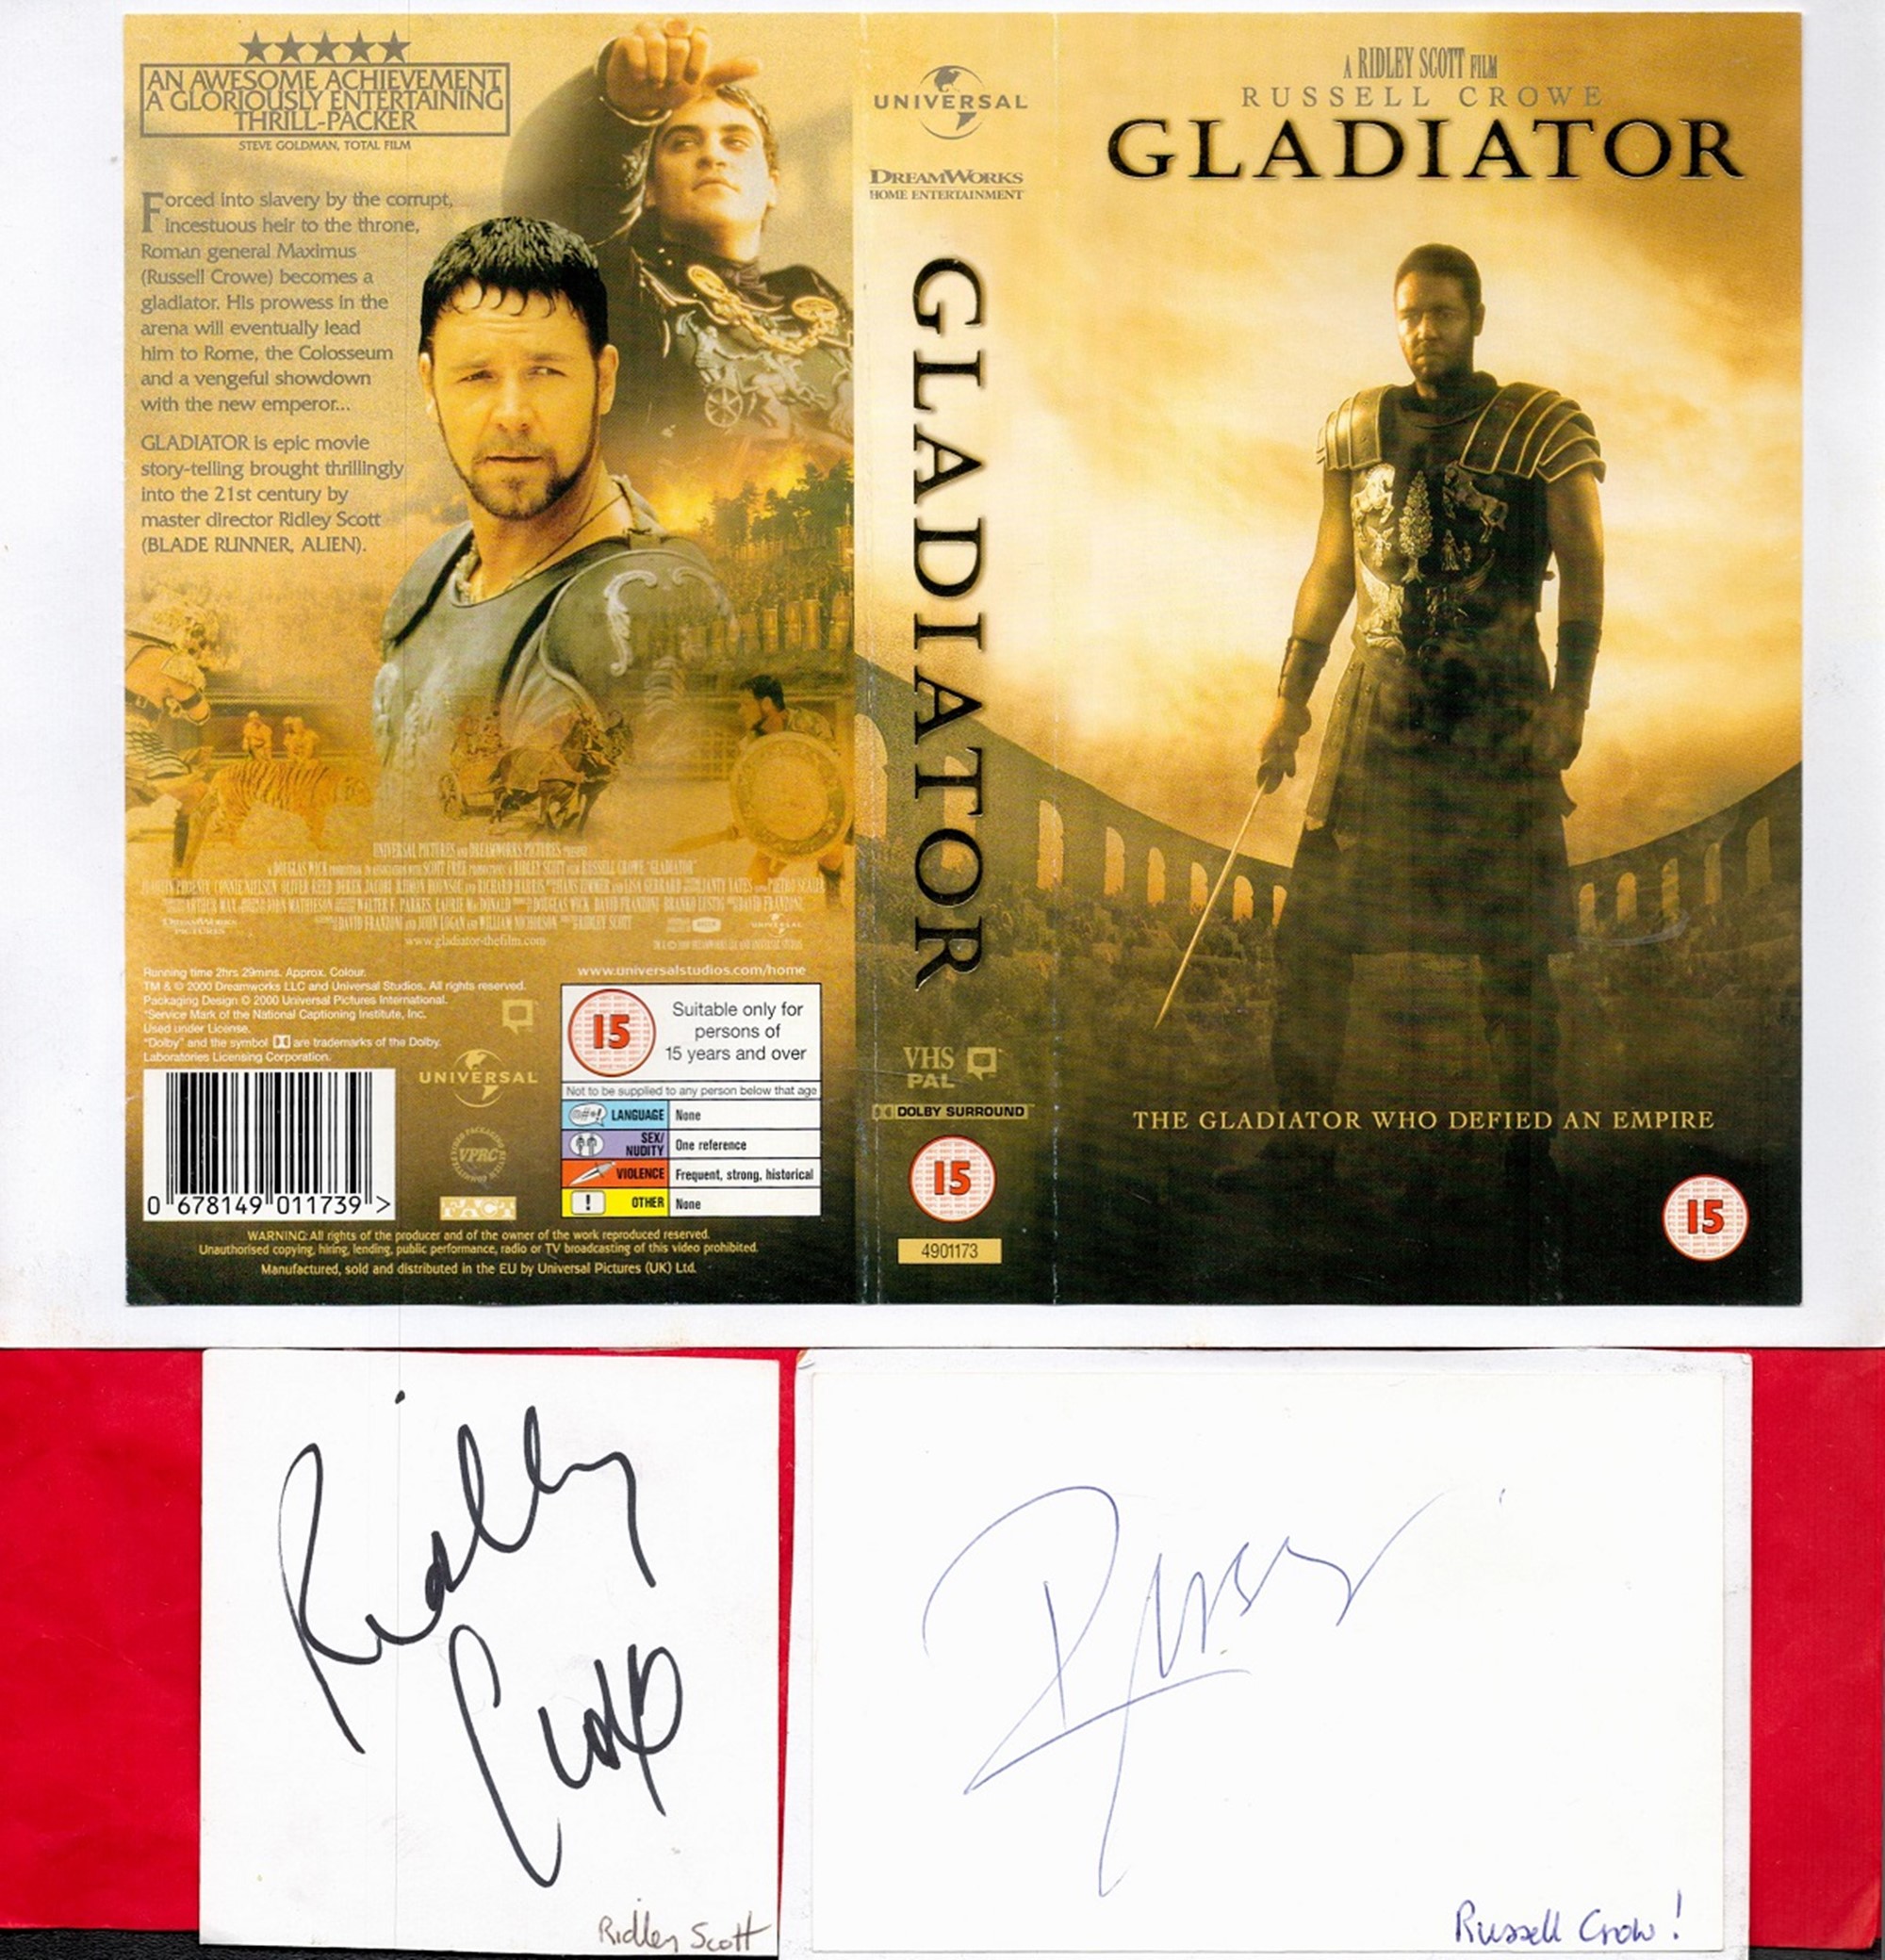 Russell Crowe and Ridley Scott signed separate white cards and Gladiator CD sleeve.